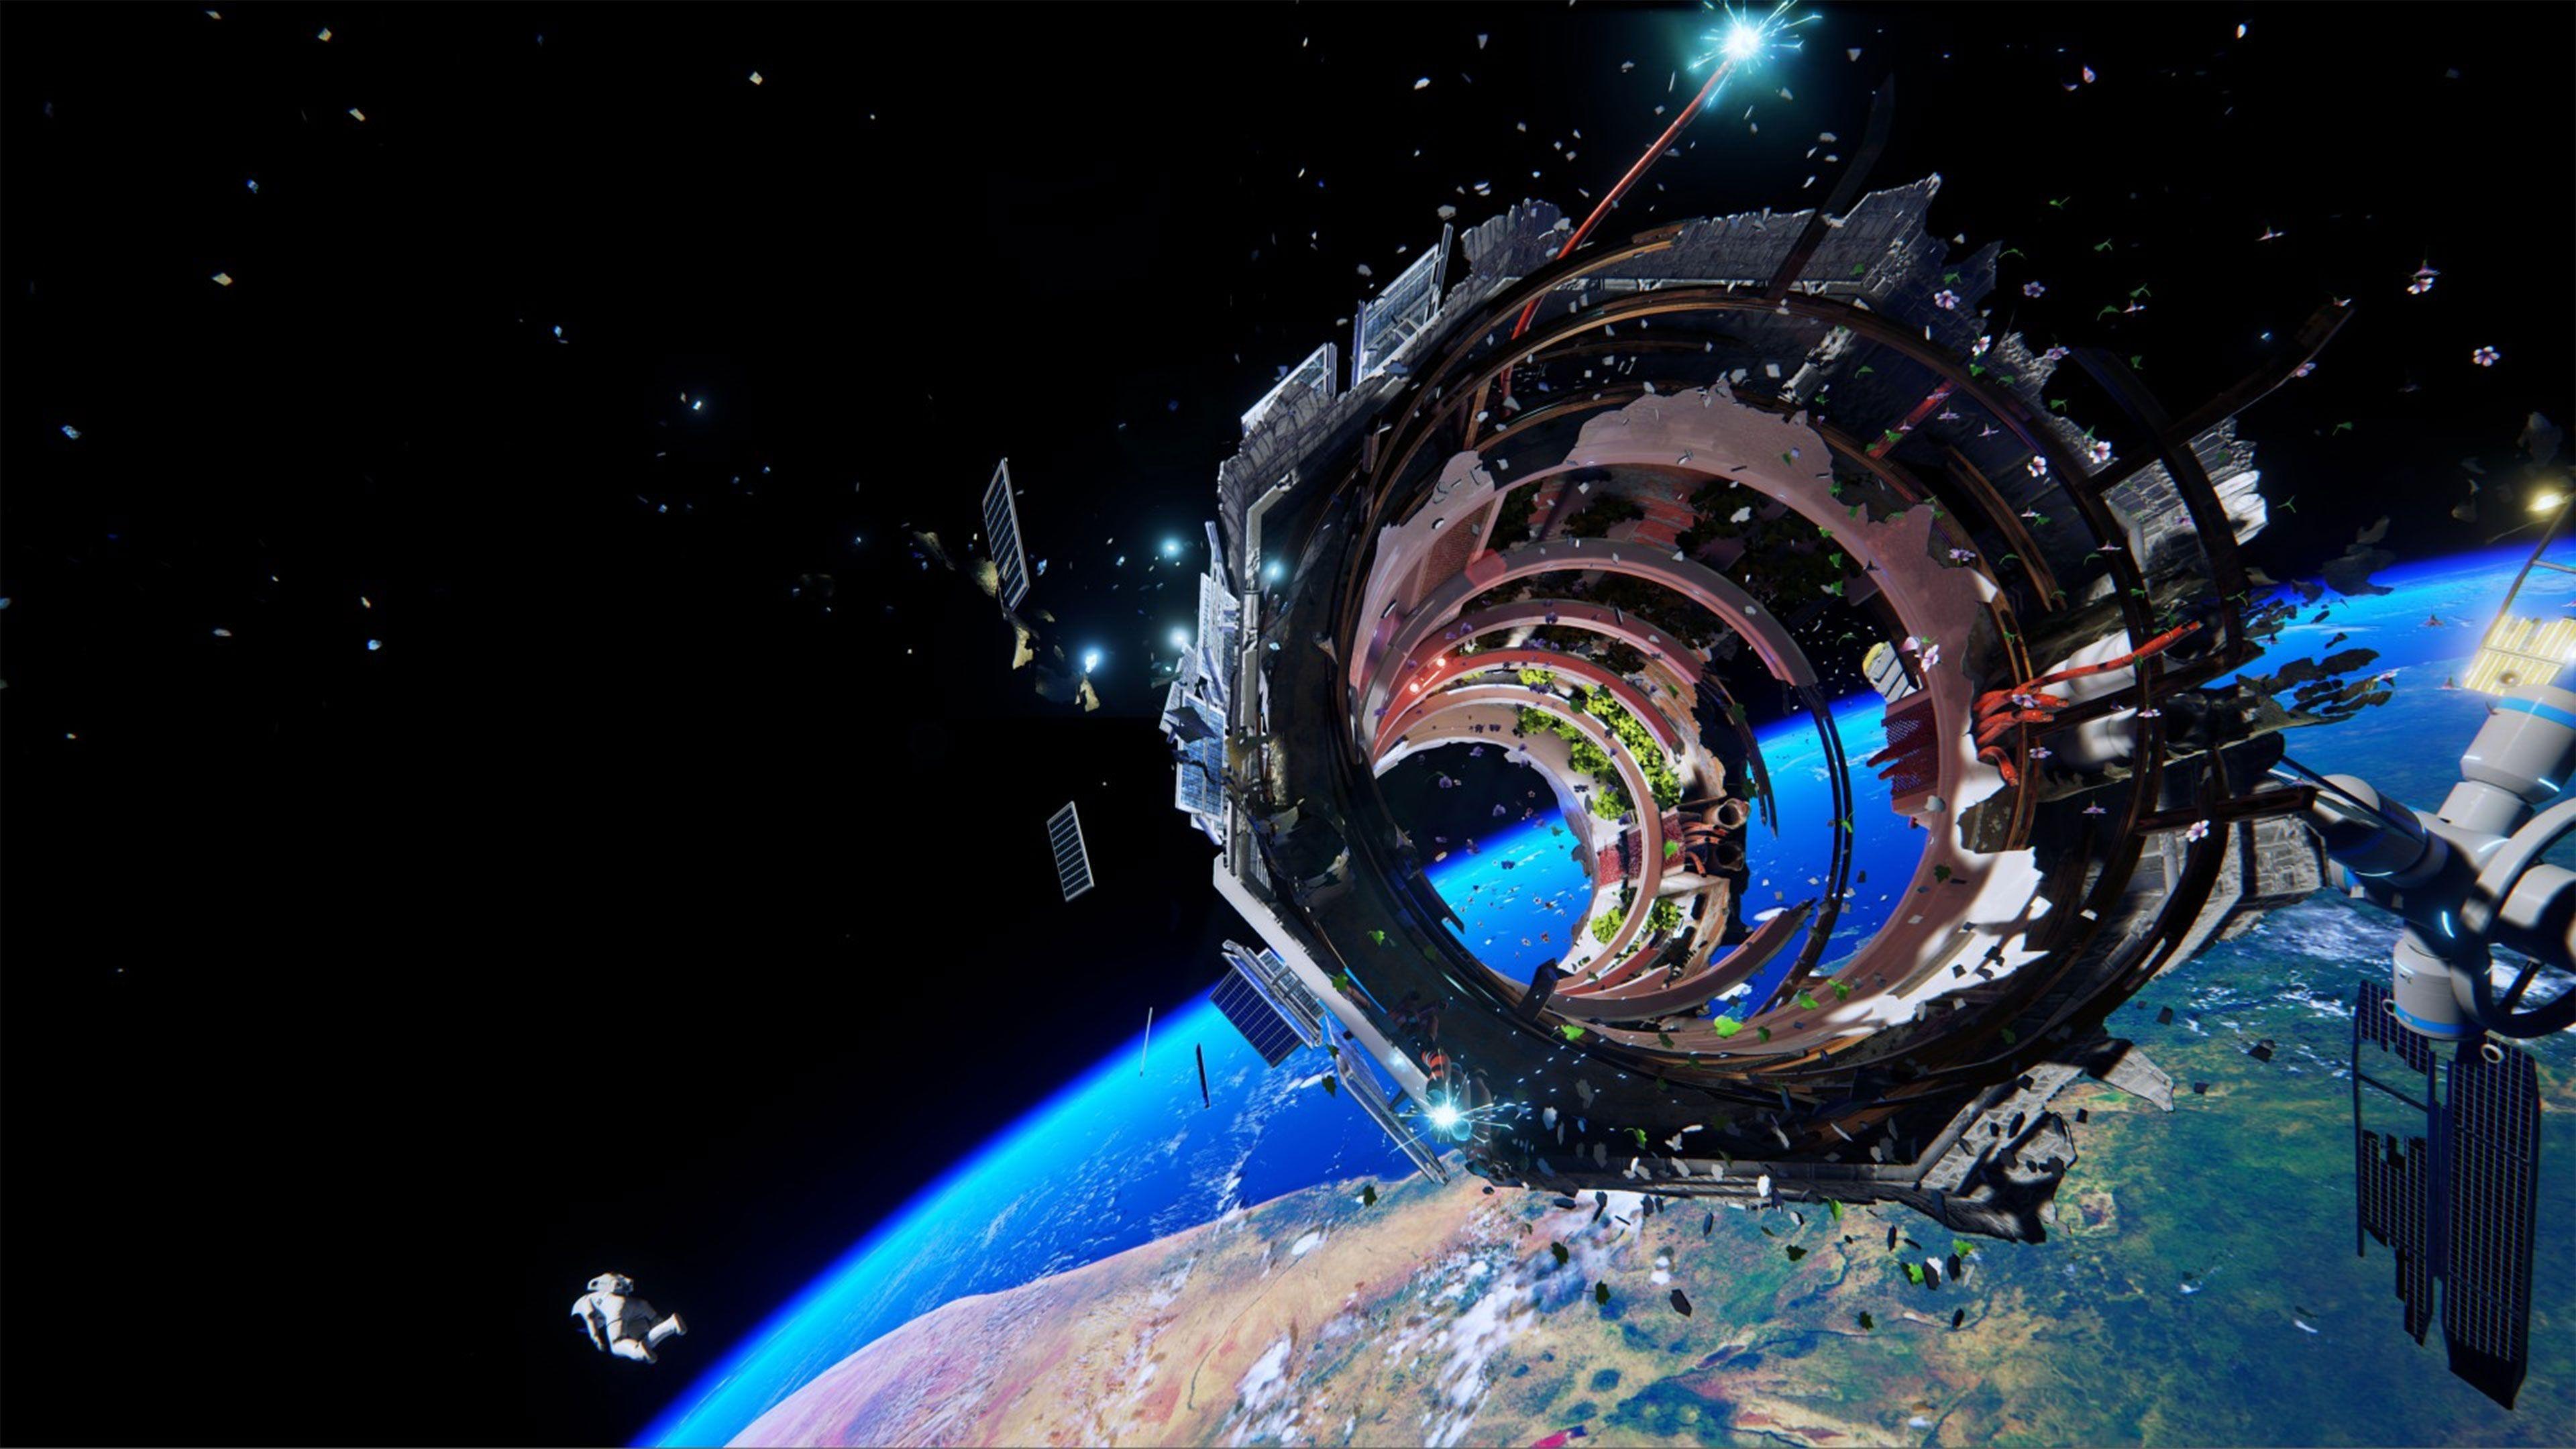 Adr1ft Wallpapers in Ultra HD